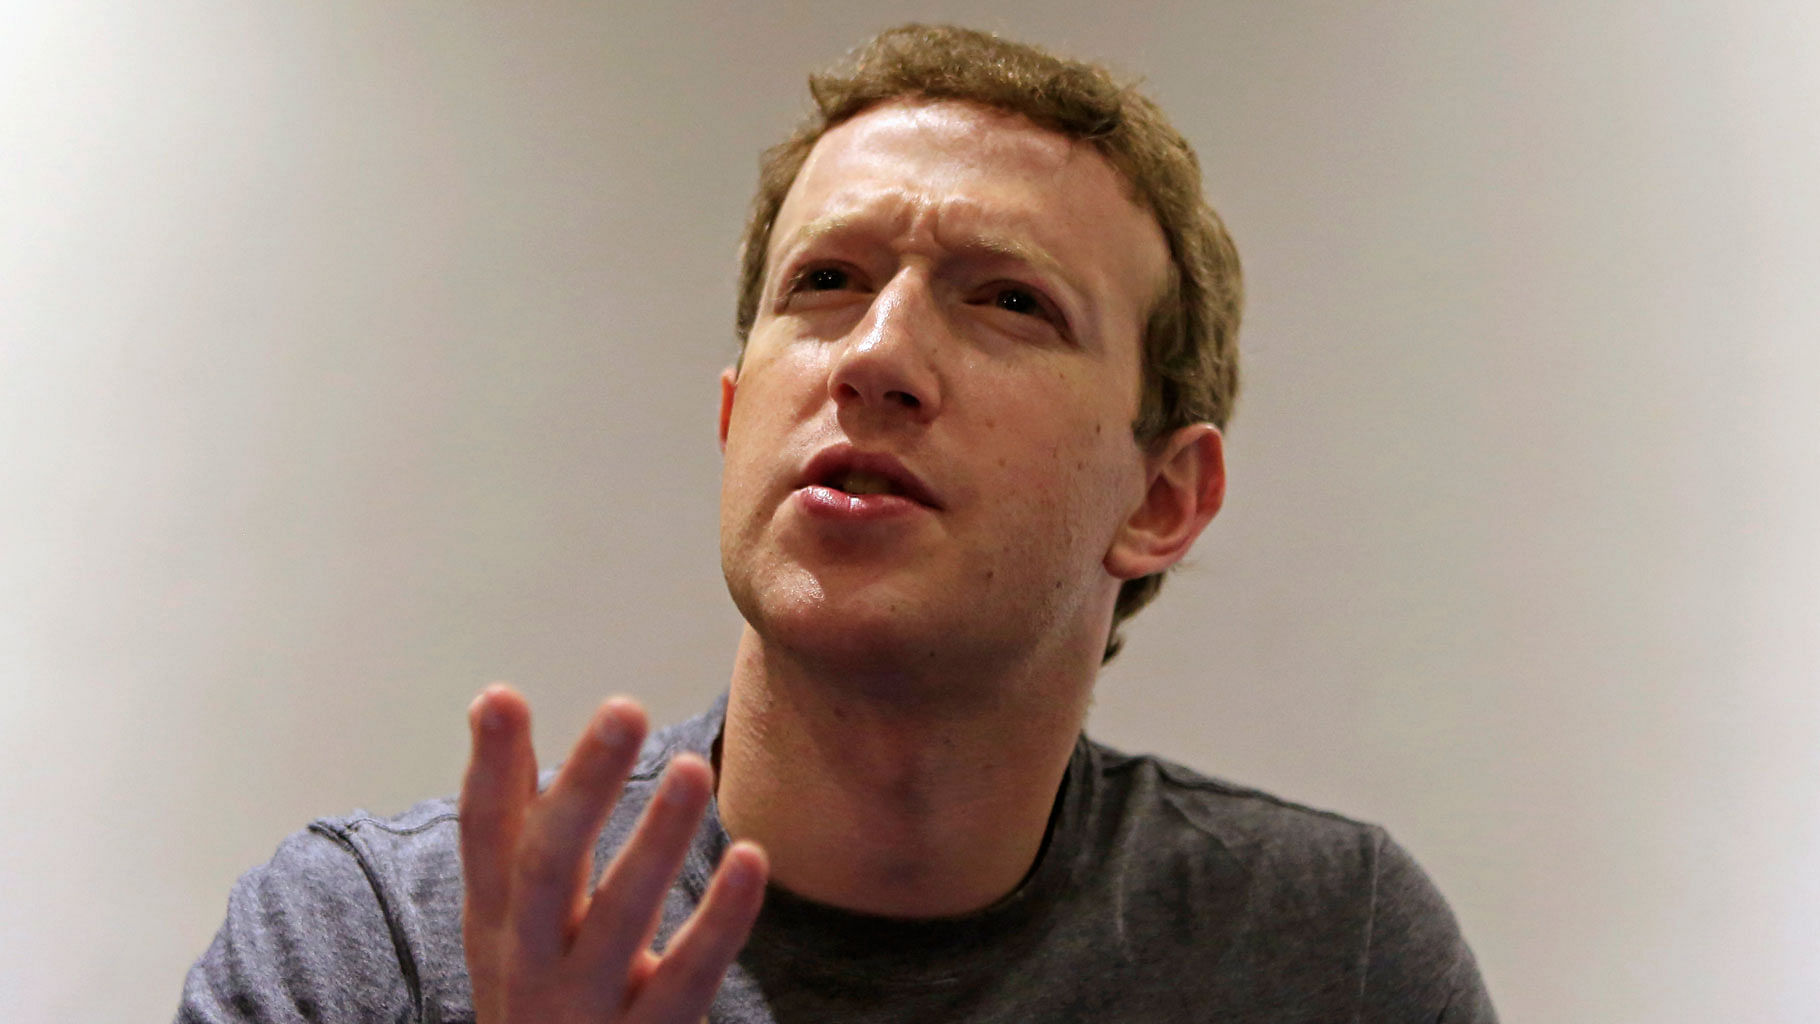 Facebook’s Zuckerberg found Andreessen’s reaction to India’s stand on Free Basics “deeply upsetting.” (Photo: Reuters)